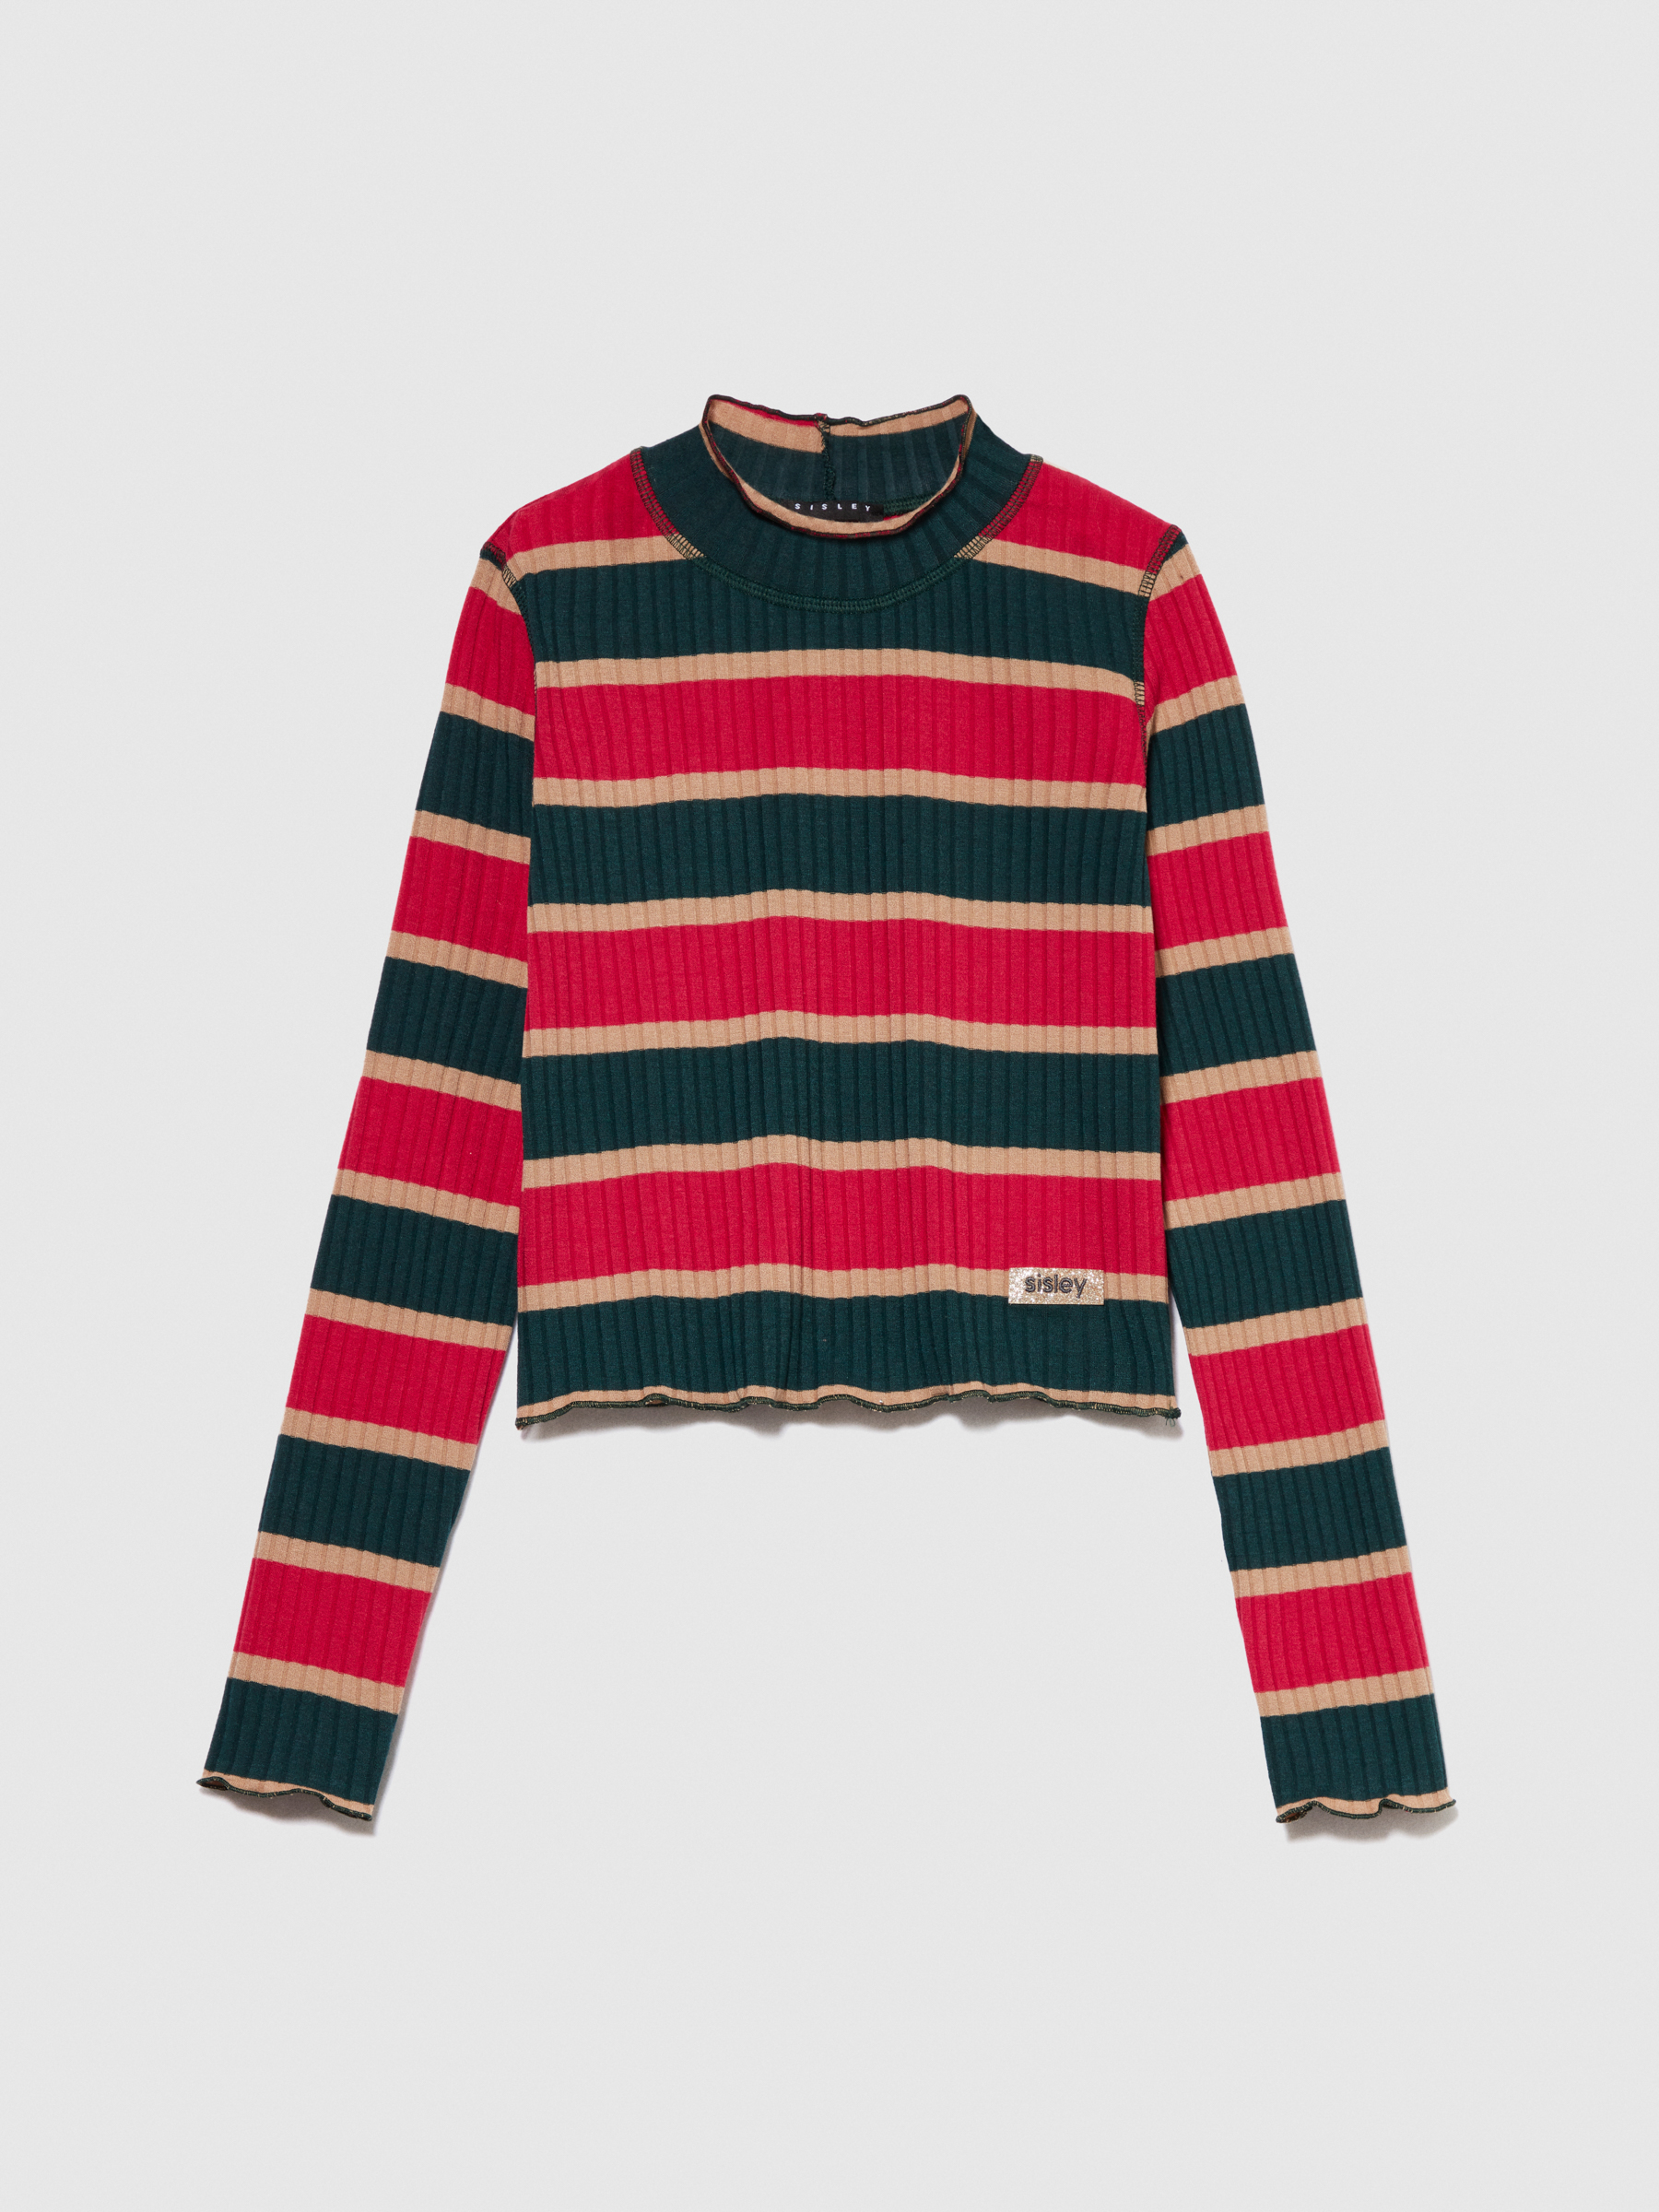 Sisley Young - Striped Turtleneck T-shirt, Woman, Multi-color, Size: S